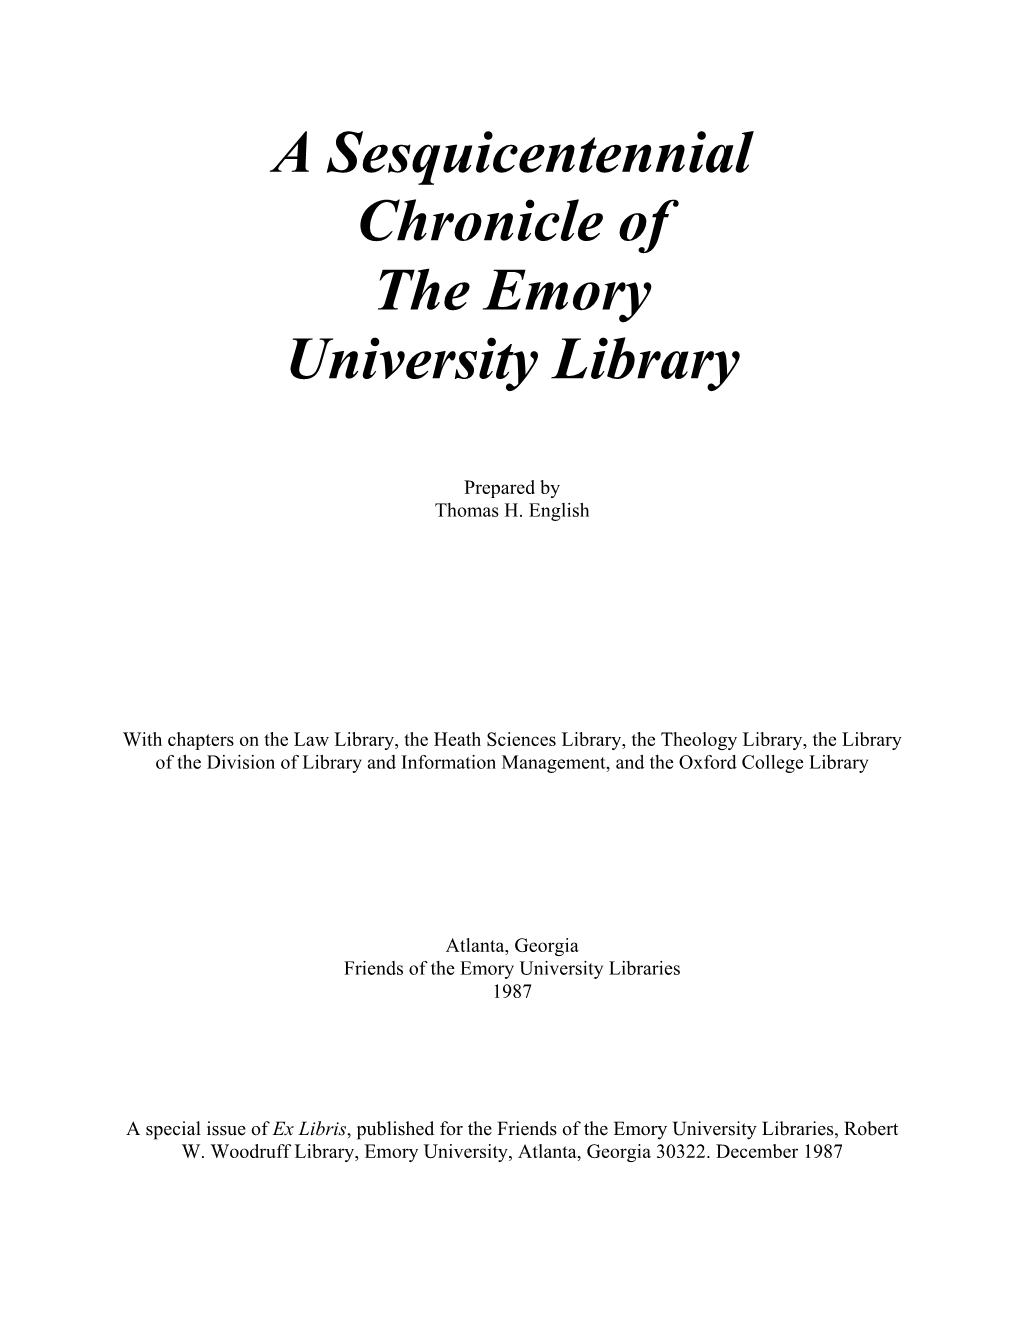 A Sesquicentennial Chronicle of the Emory University Library